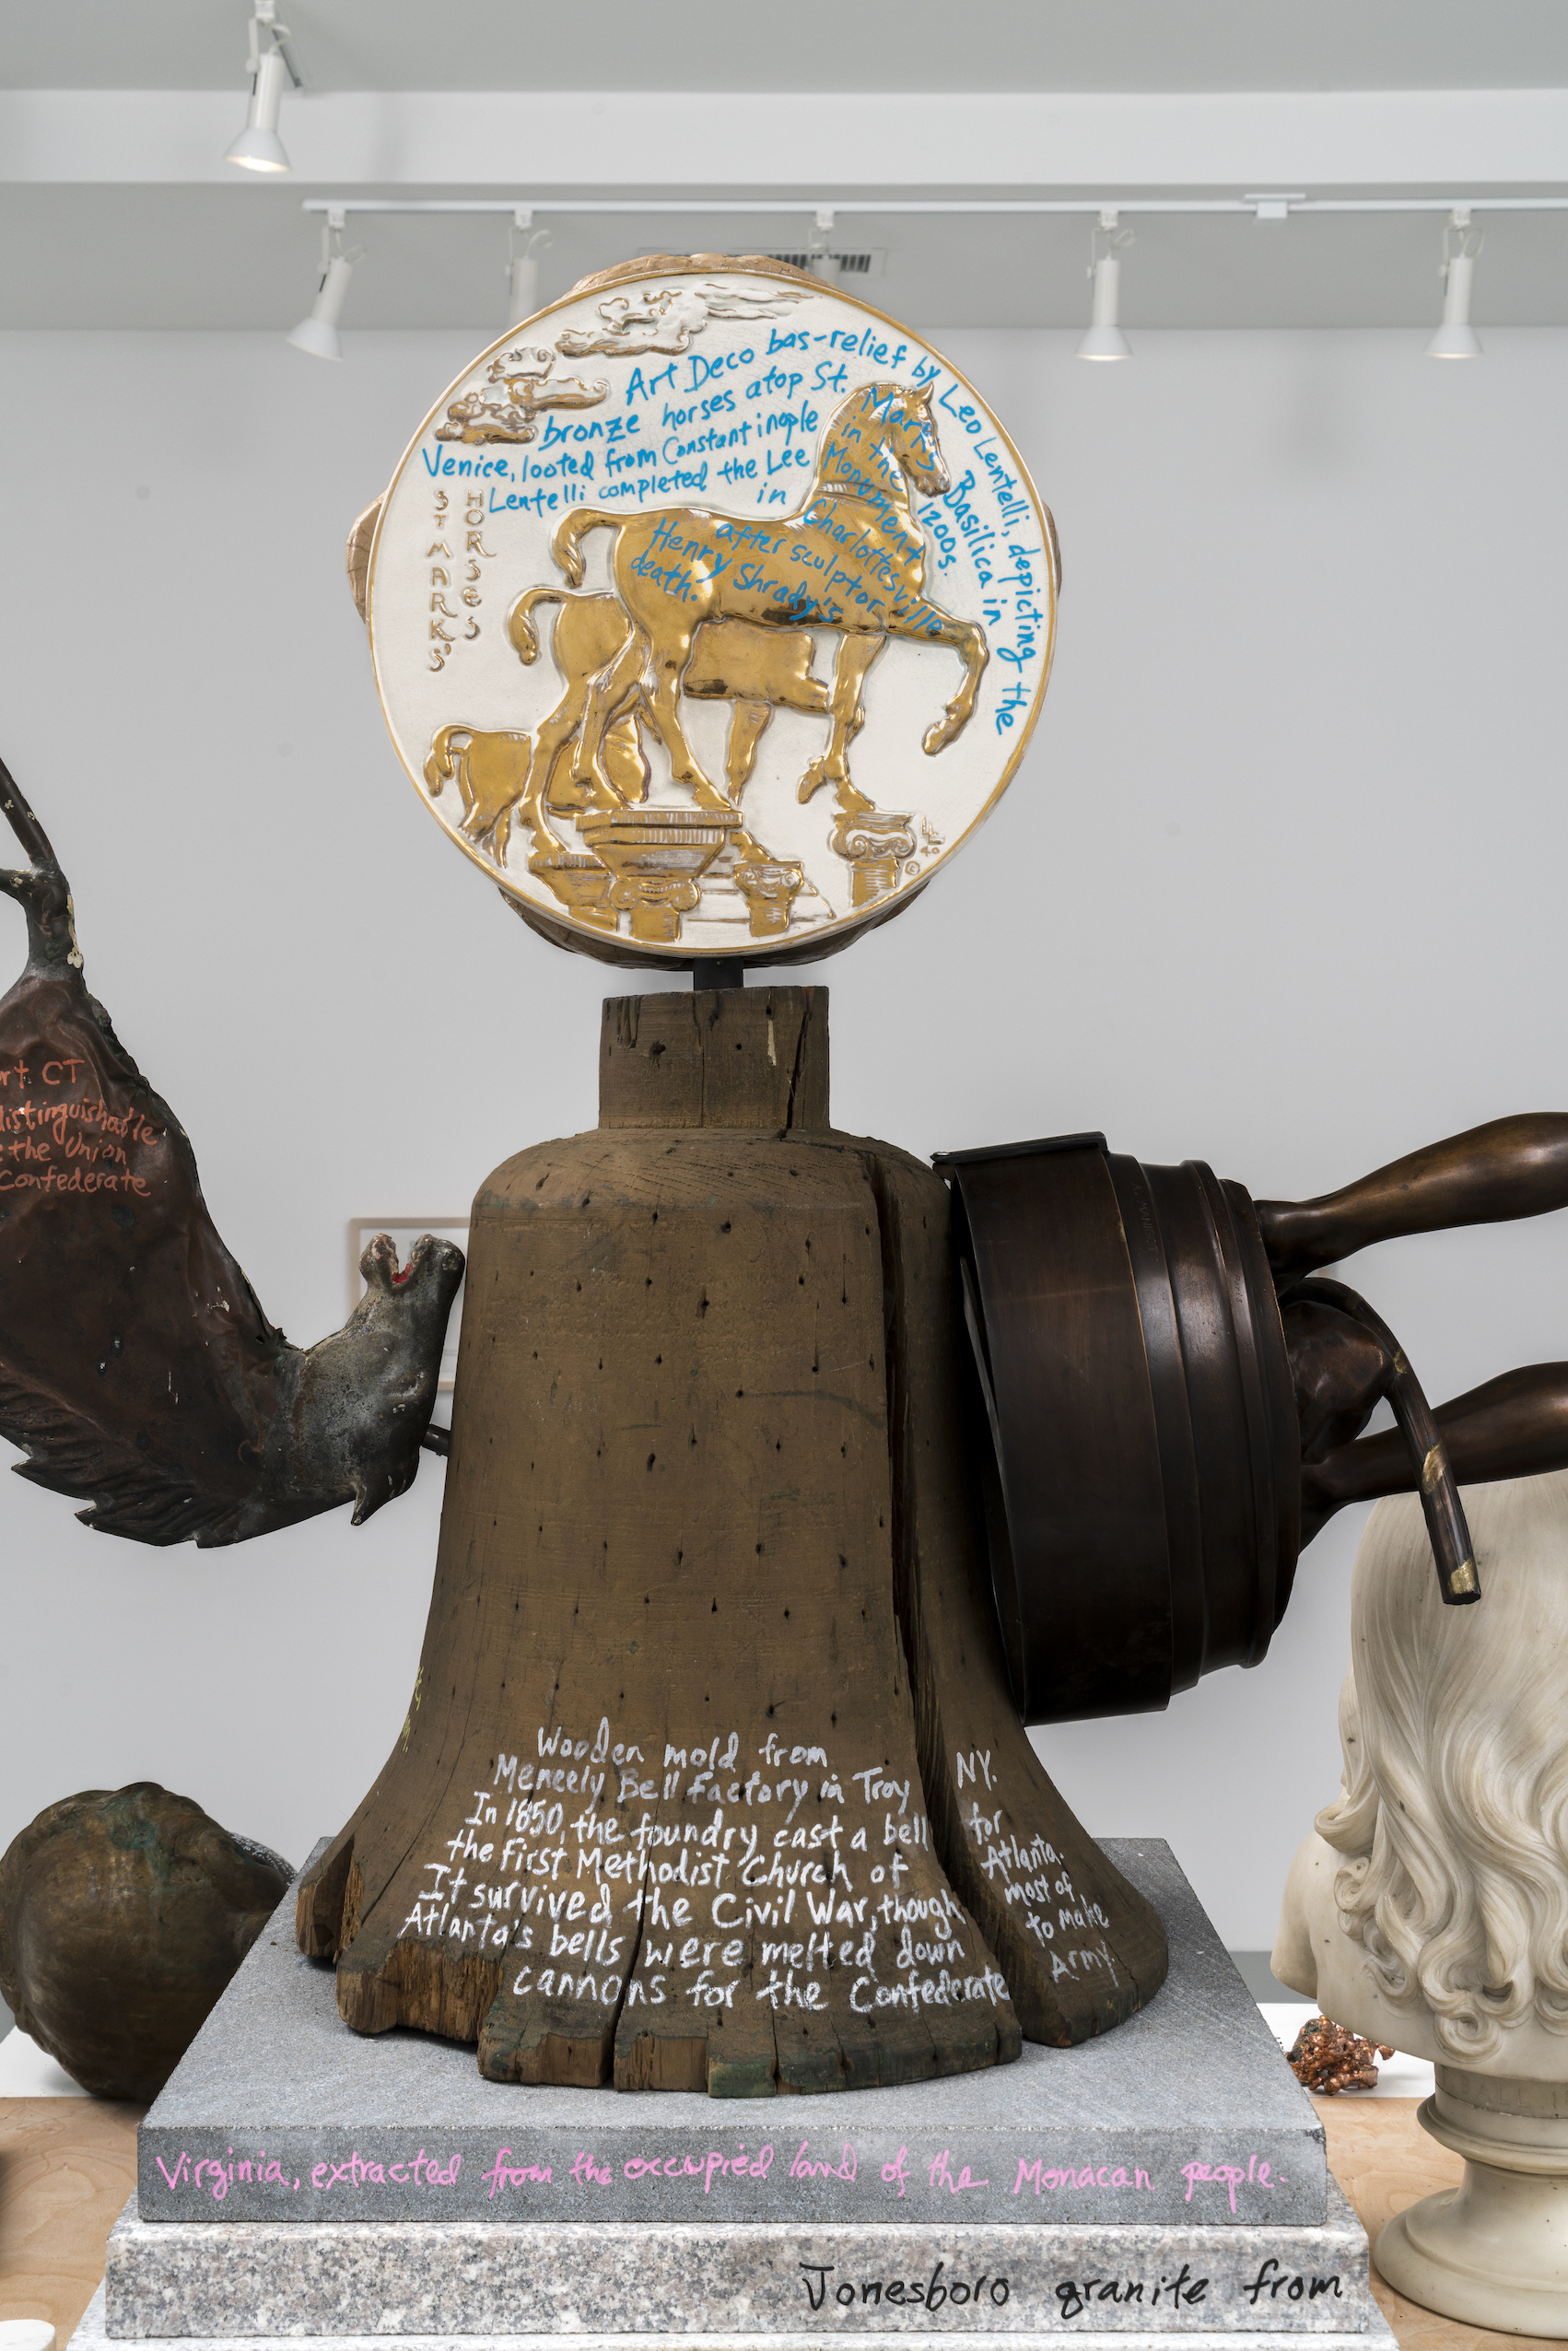 A photograph of a detail of a sculpture in a gallery in the shape of an anthropomorphic monster. The photograph shows the figure’s torso, which is composed of repurposed objects including a wooden bell form and a circular bas-relief. On the bell form, the artist has written “wooden mold from Meneely Bell Factory in Troy, NY. In 1850, the foundry cast a fell for the First Methodist Church of Atlanta. It survived the Civil War, though most of Atlanta’s bells were melted down to make cannons for the Confederate Army.” On the circular bas-relief, the artist has written “Art Deco bas-relief by Leo Lentilli, depicting the bronze horses atop St. Mark’s Basilica in Venice, looted from Constantinople in the 1200s. Lentelli completed the Lee Moniument in Charlottesville after sculptor Henry Shrady’s death.”